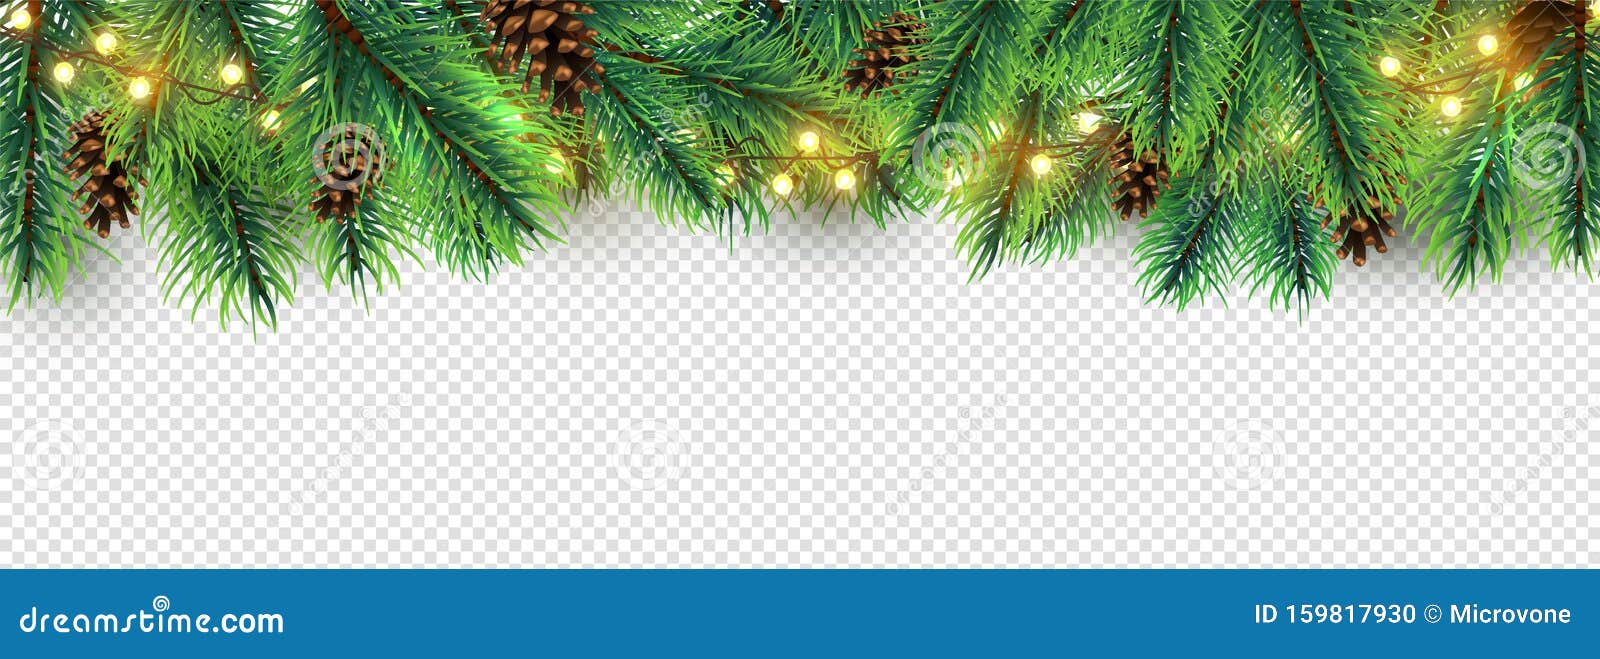 christmas border. holiday garland  on transparent background.  christmas tree branches, lights and cones